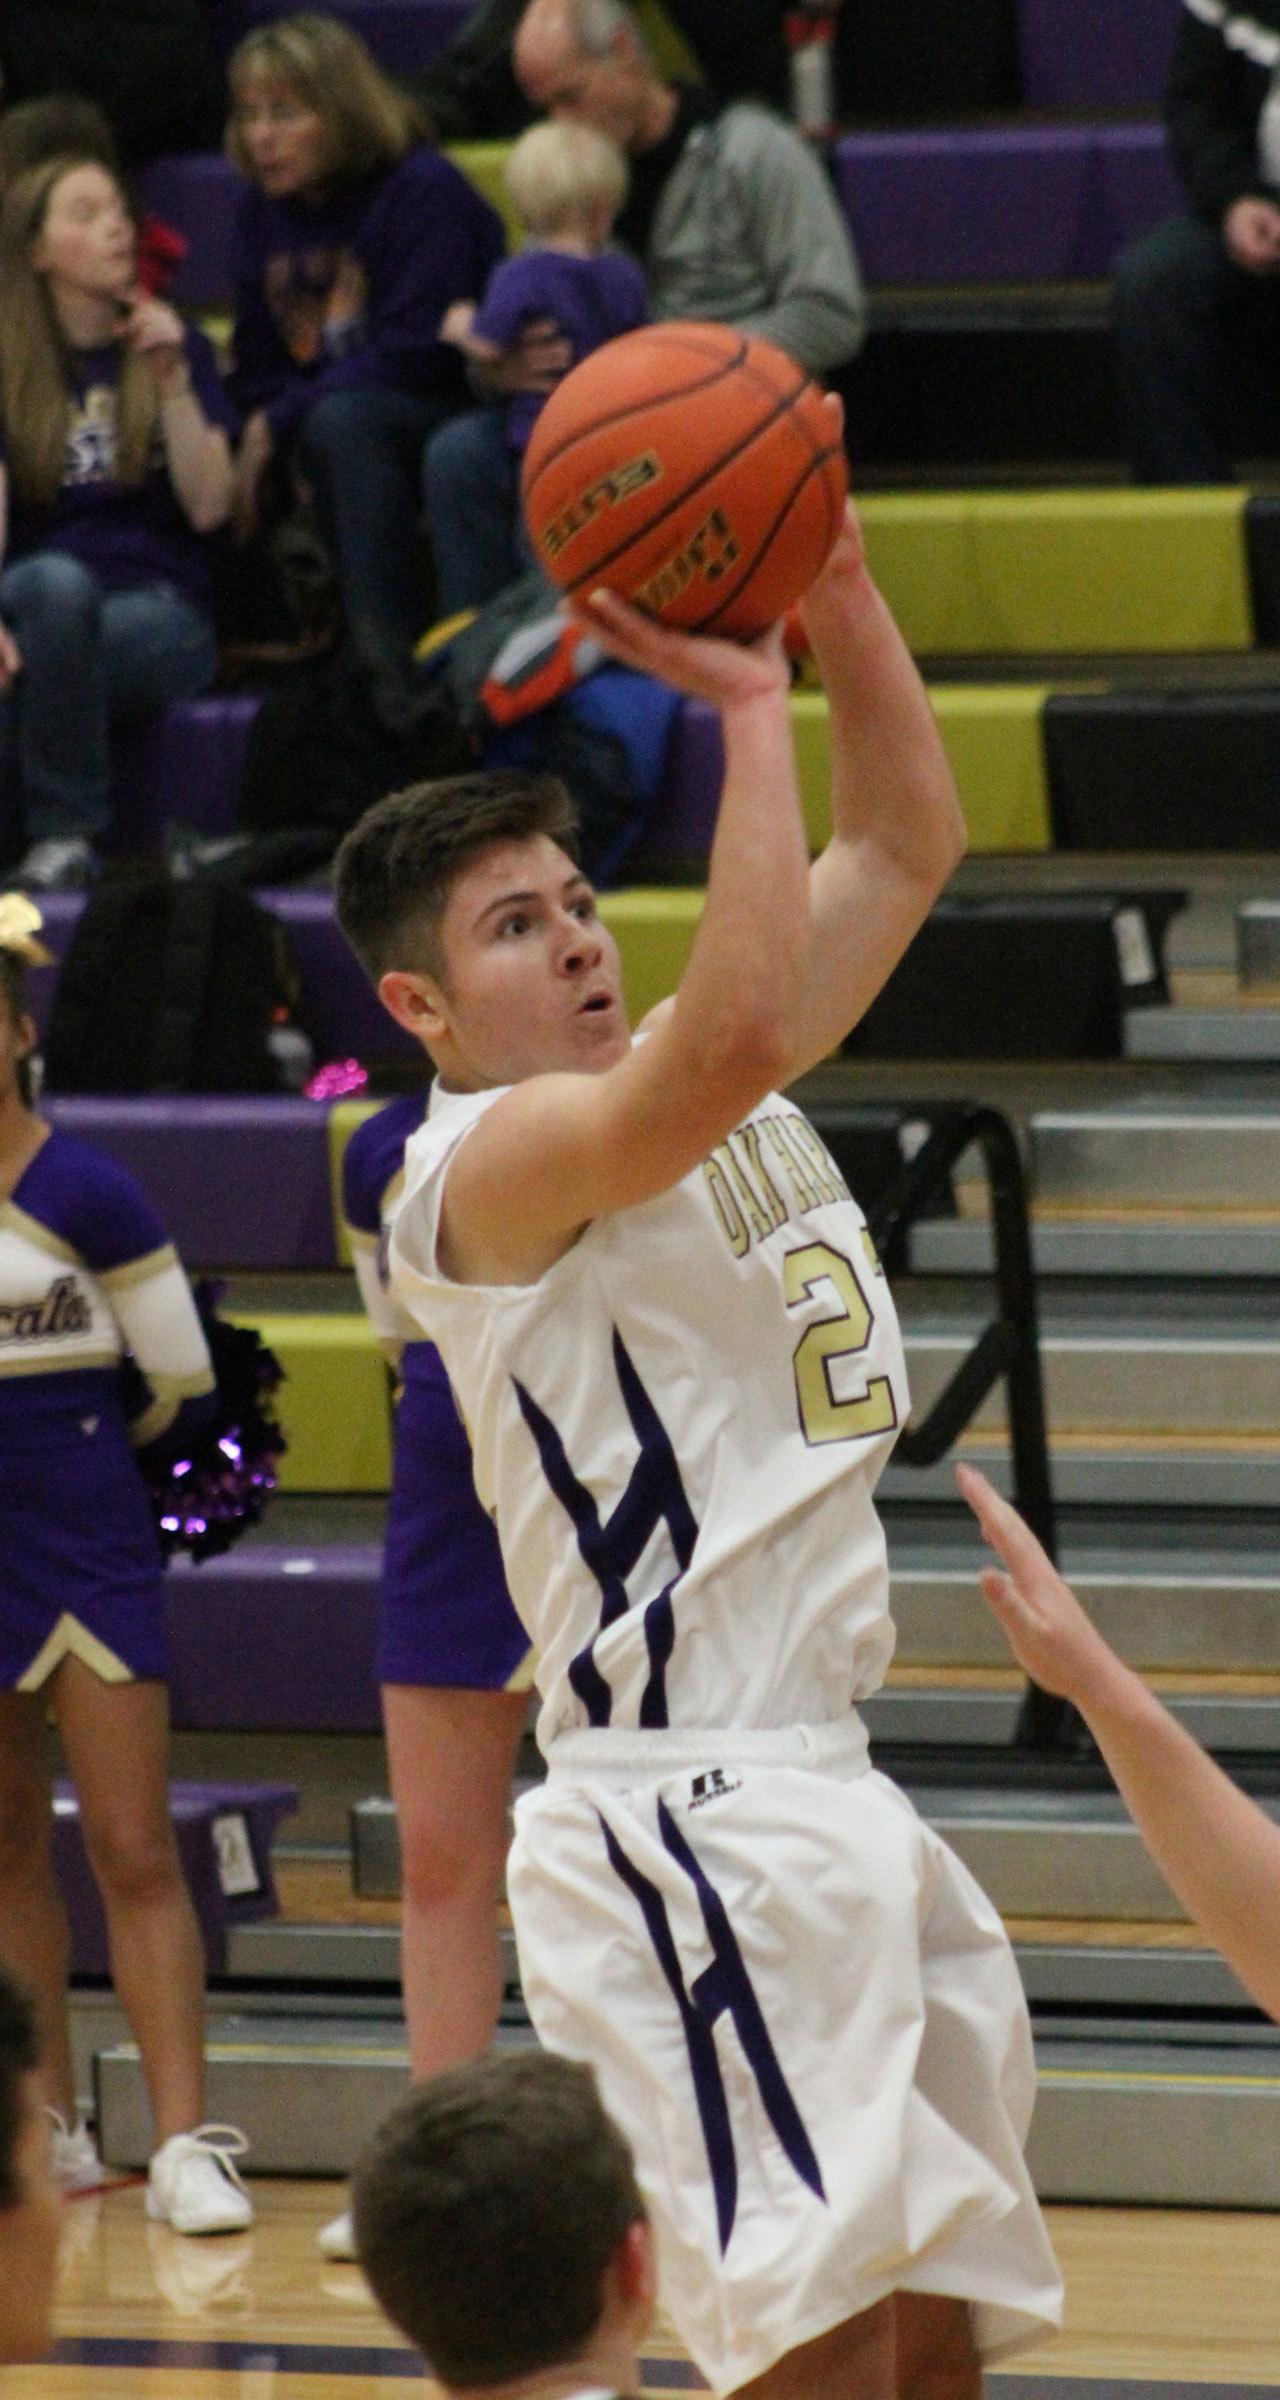 Mitchell is one of the top reserves on this year’s basketball team. (Photo by Jim Waller)